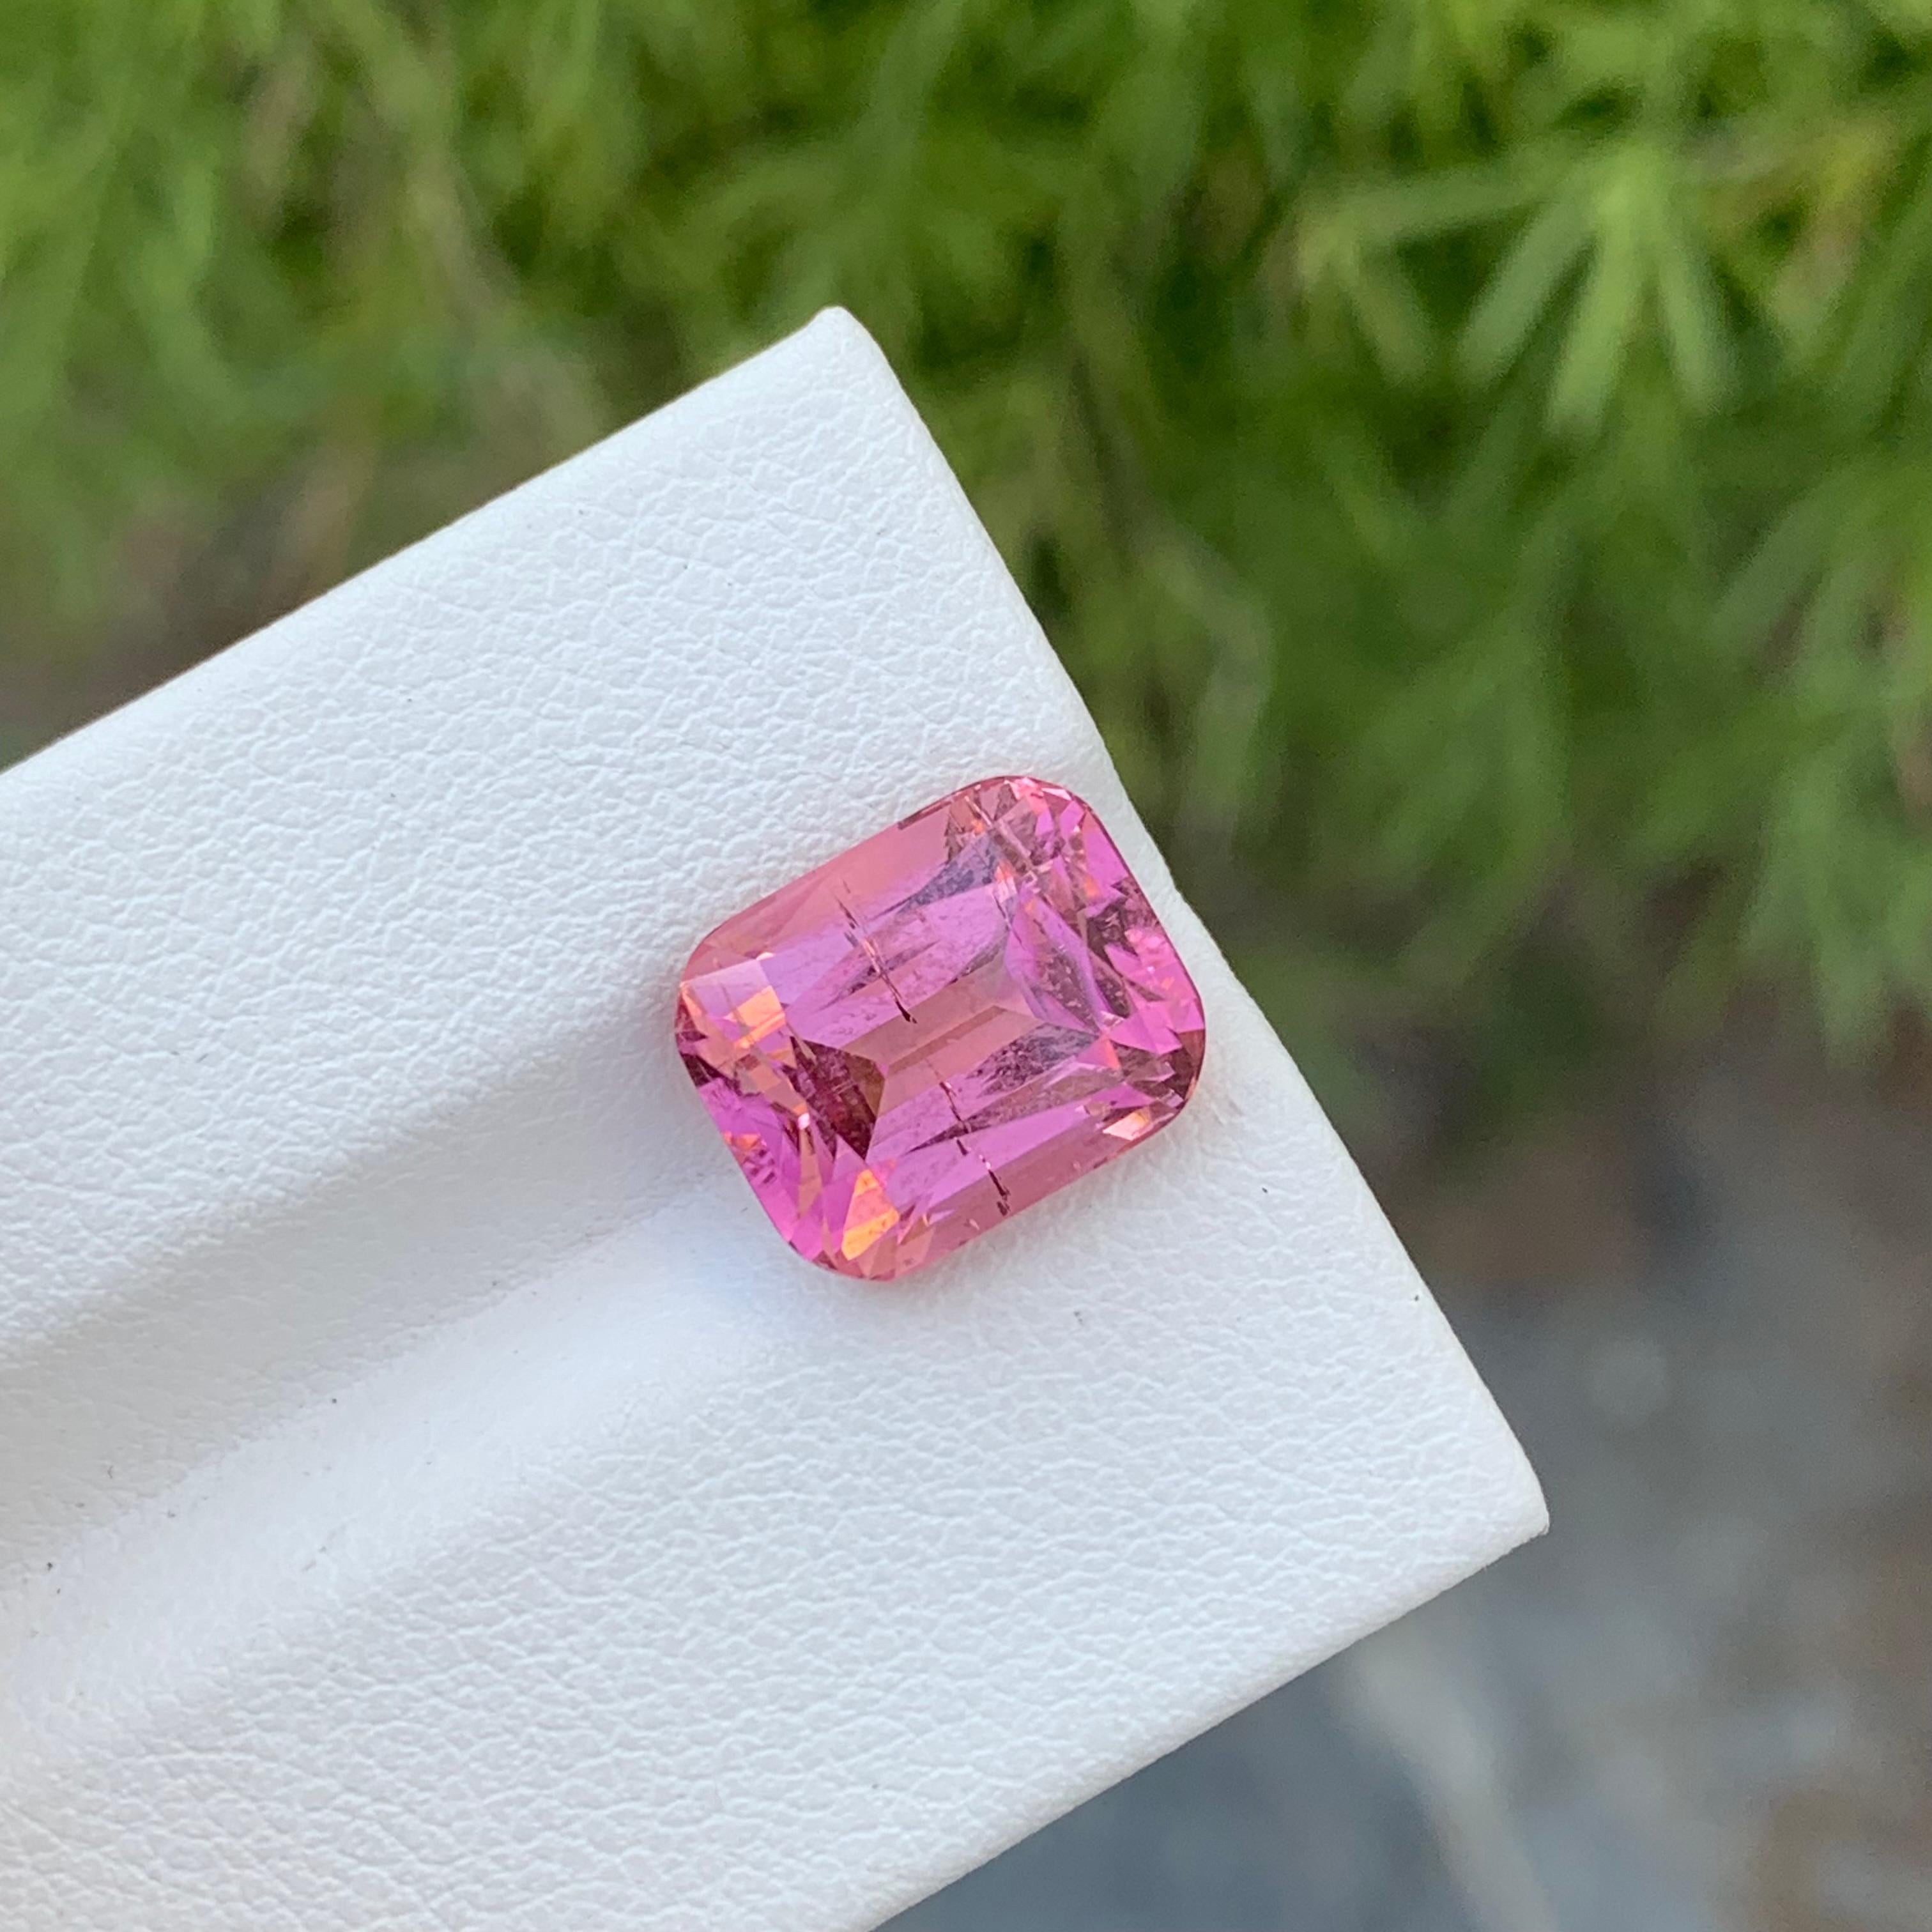 Loose Pink Tourmaline
Weight: 6.05 Carats
Dimension: 10.8 x 9.1 x 7.8 Mm
Colour: Pink
Origin: Afghanistan
Shape : Cushion
Certificate: On Demand
Treatment: Non

Pink tourmaline, known for its captivating hue ranging from delicate pastel shades to